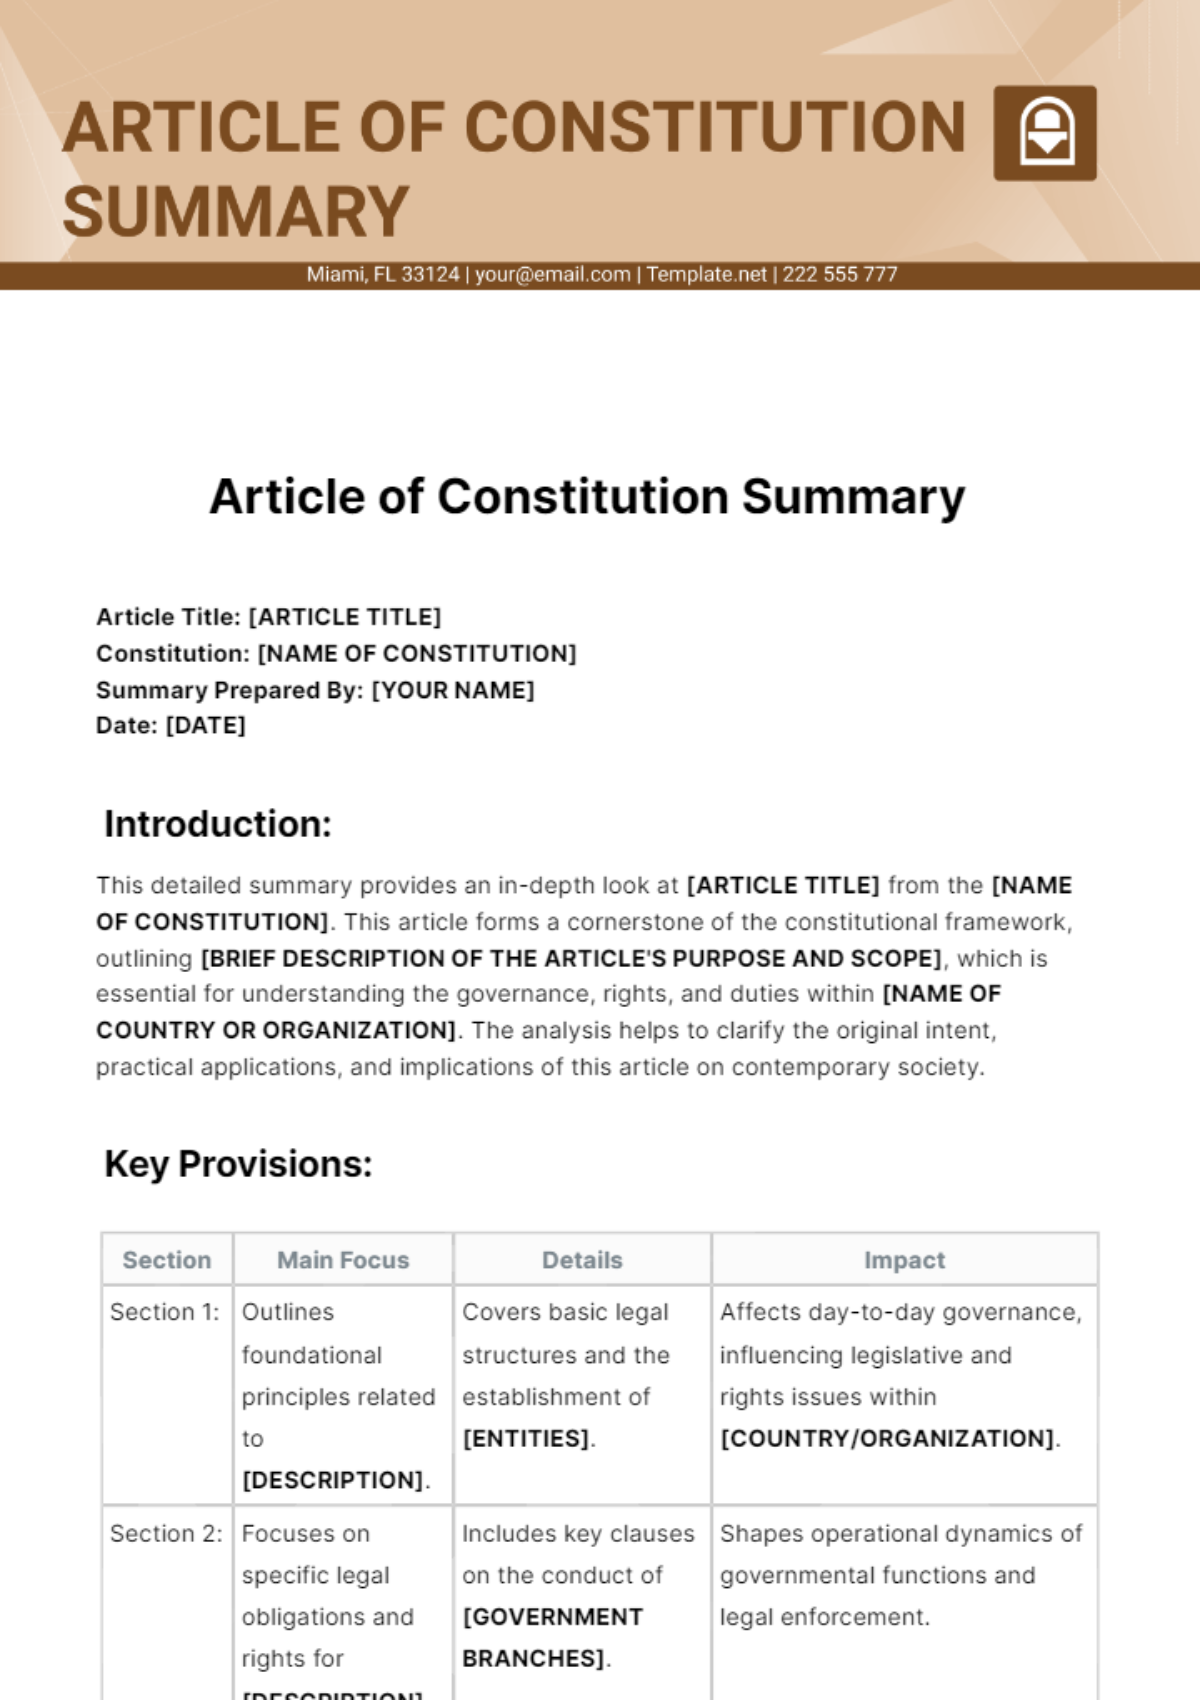 Article of Constitution Summary Template